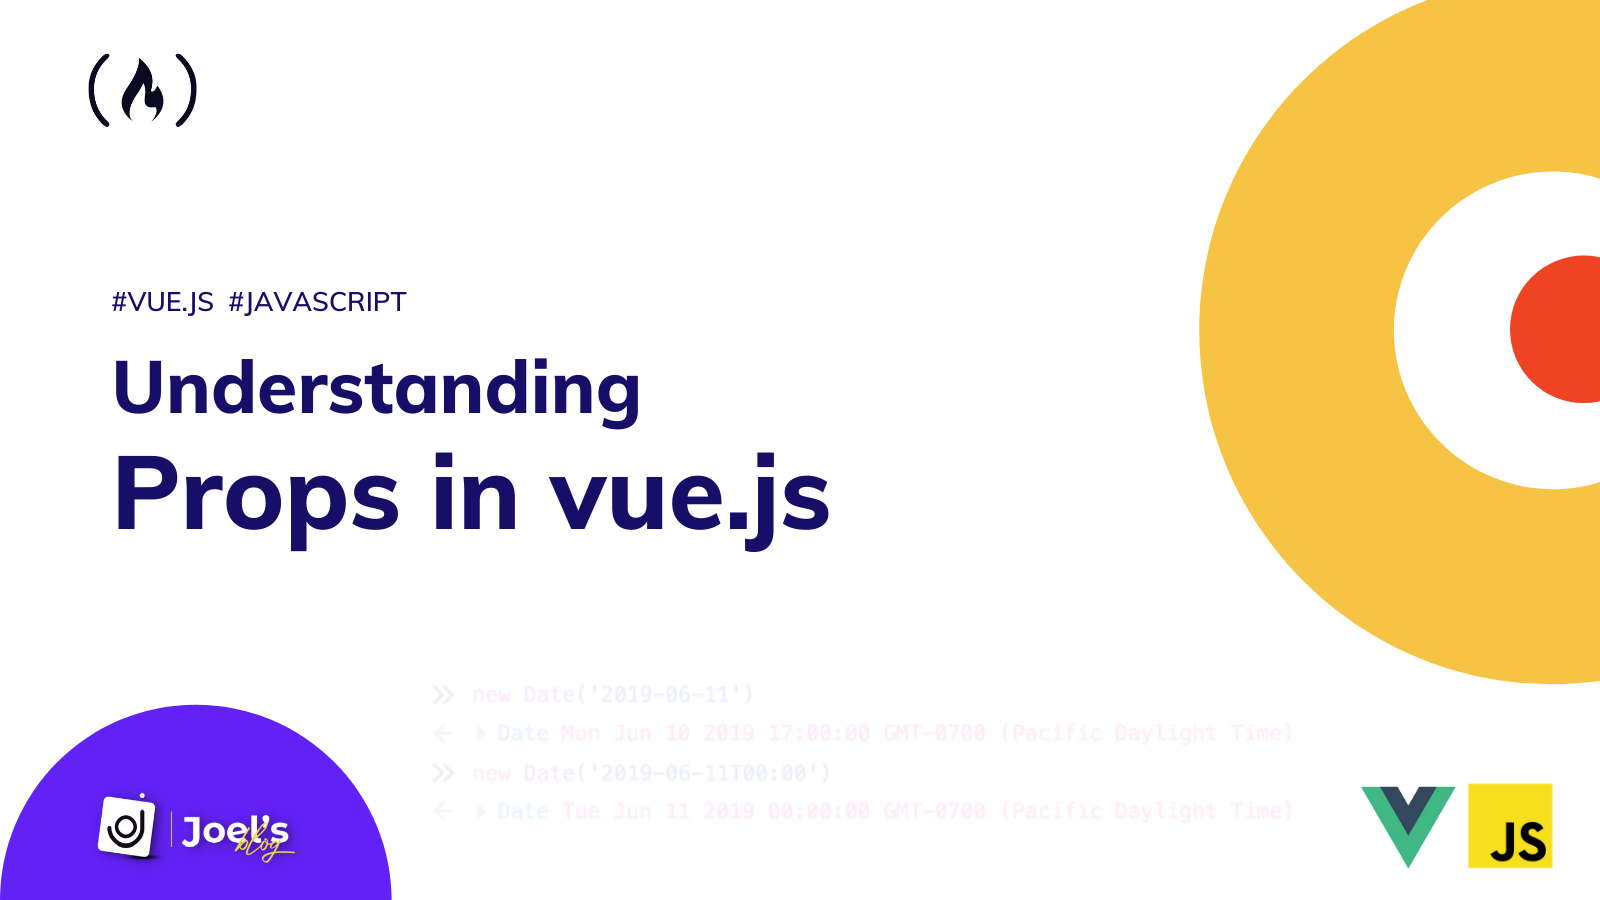 How to Use Props in Vue.js